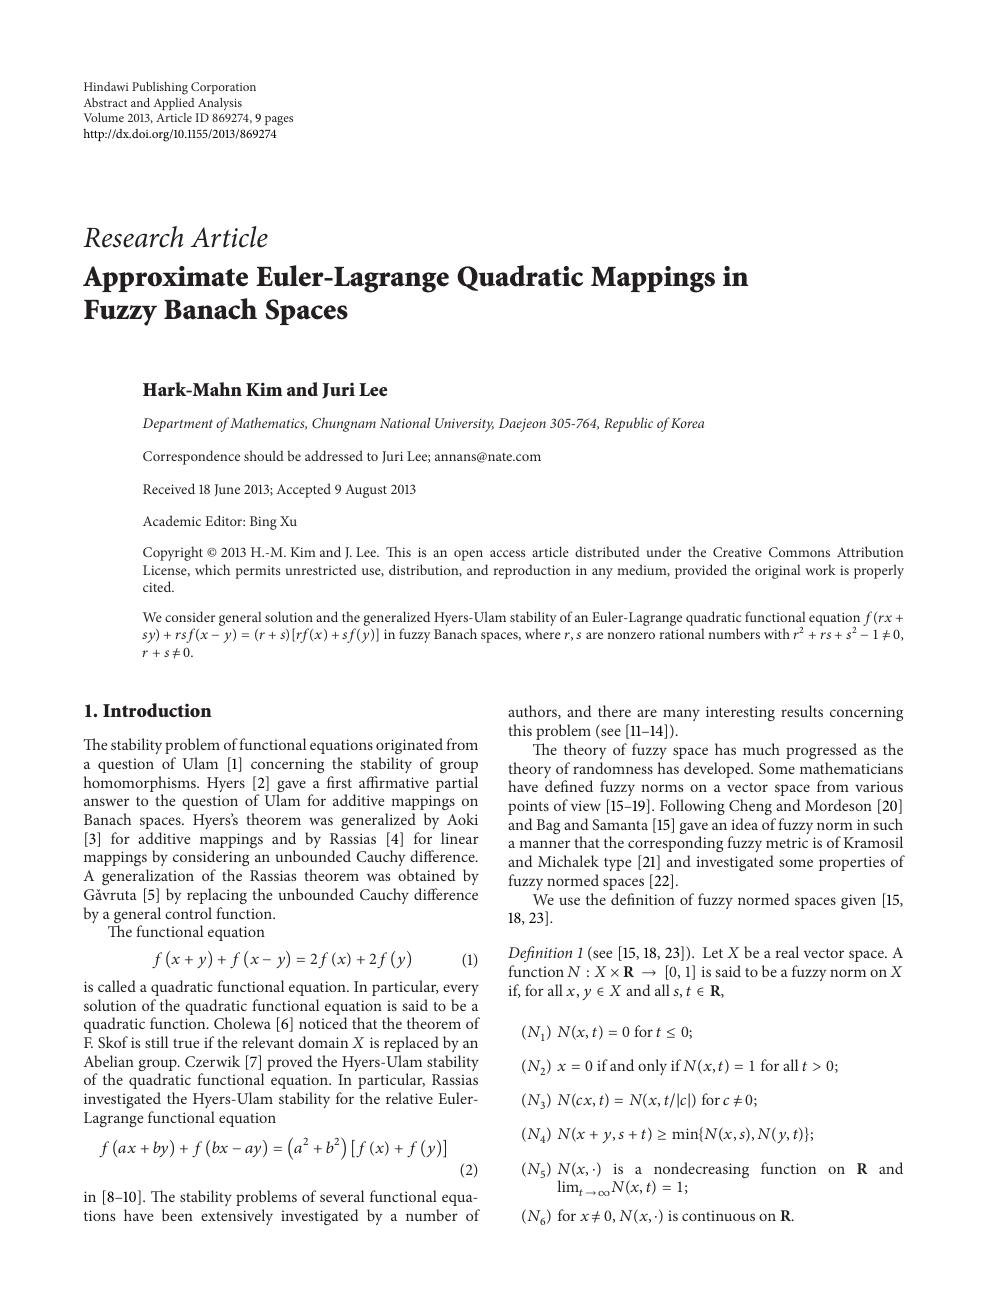 Approximate Euler Lagrange Quadratic Mappings In Fuzzy Banach Spaces Topic Of Research Paper In Mathematics Download Scholarly Article Pdf And Read For Free On Cyberleninka Open Science Hub